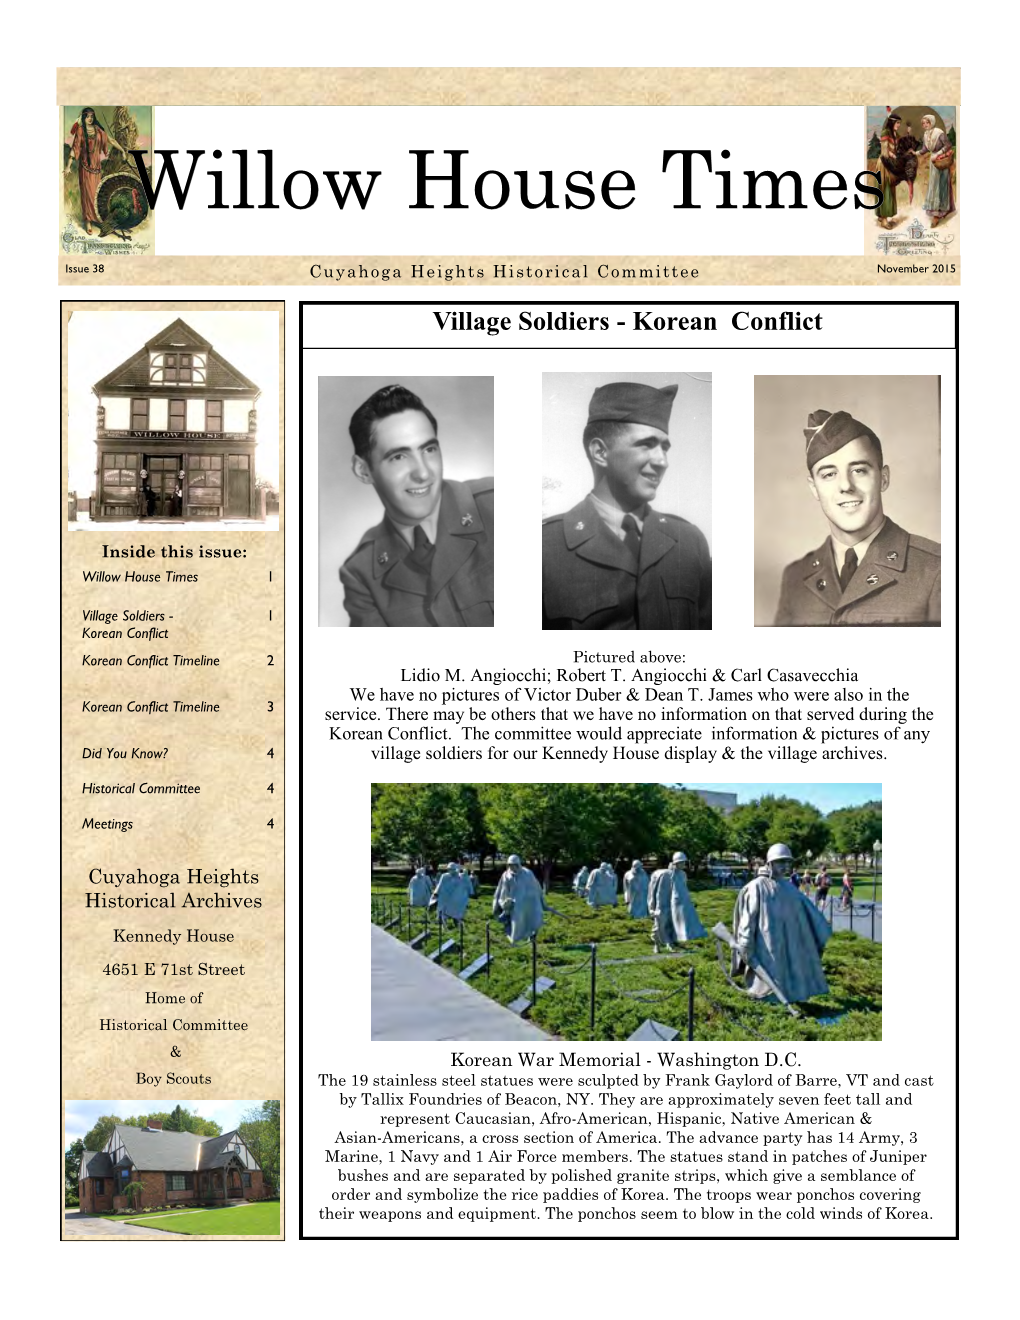 Willow House Times